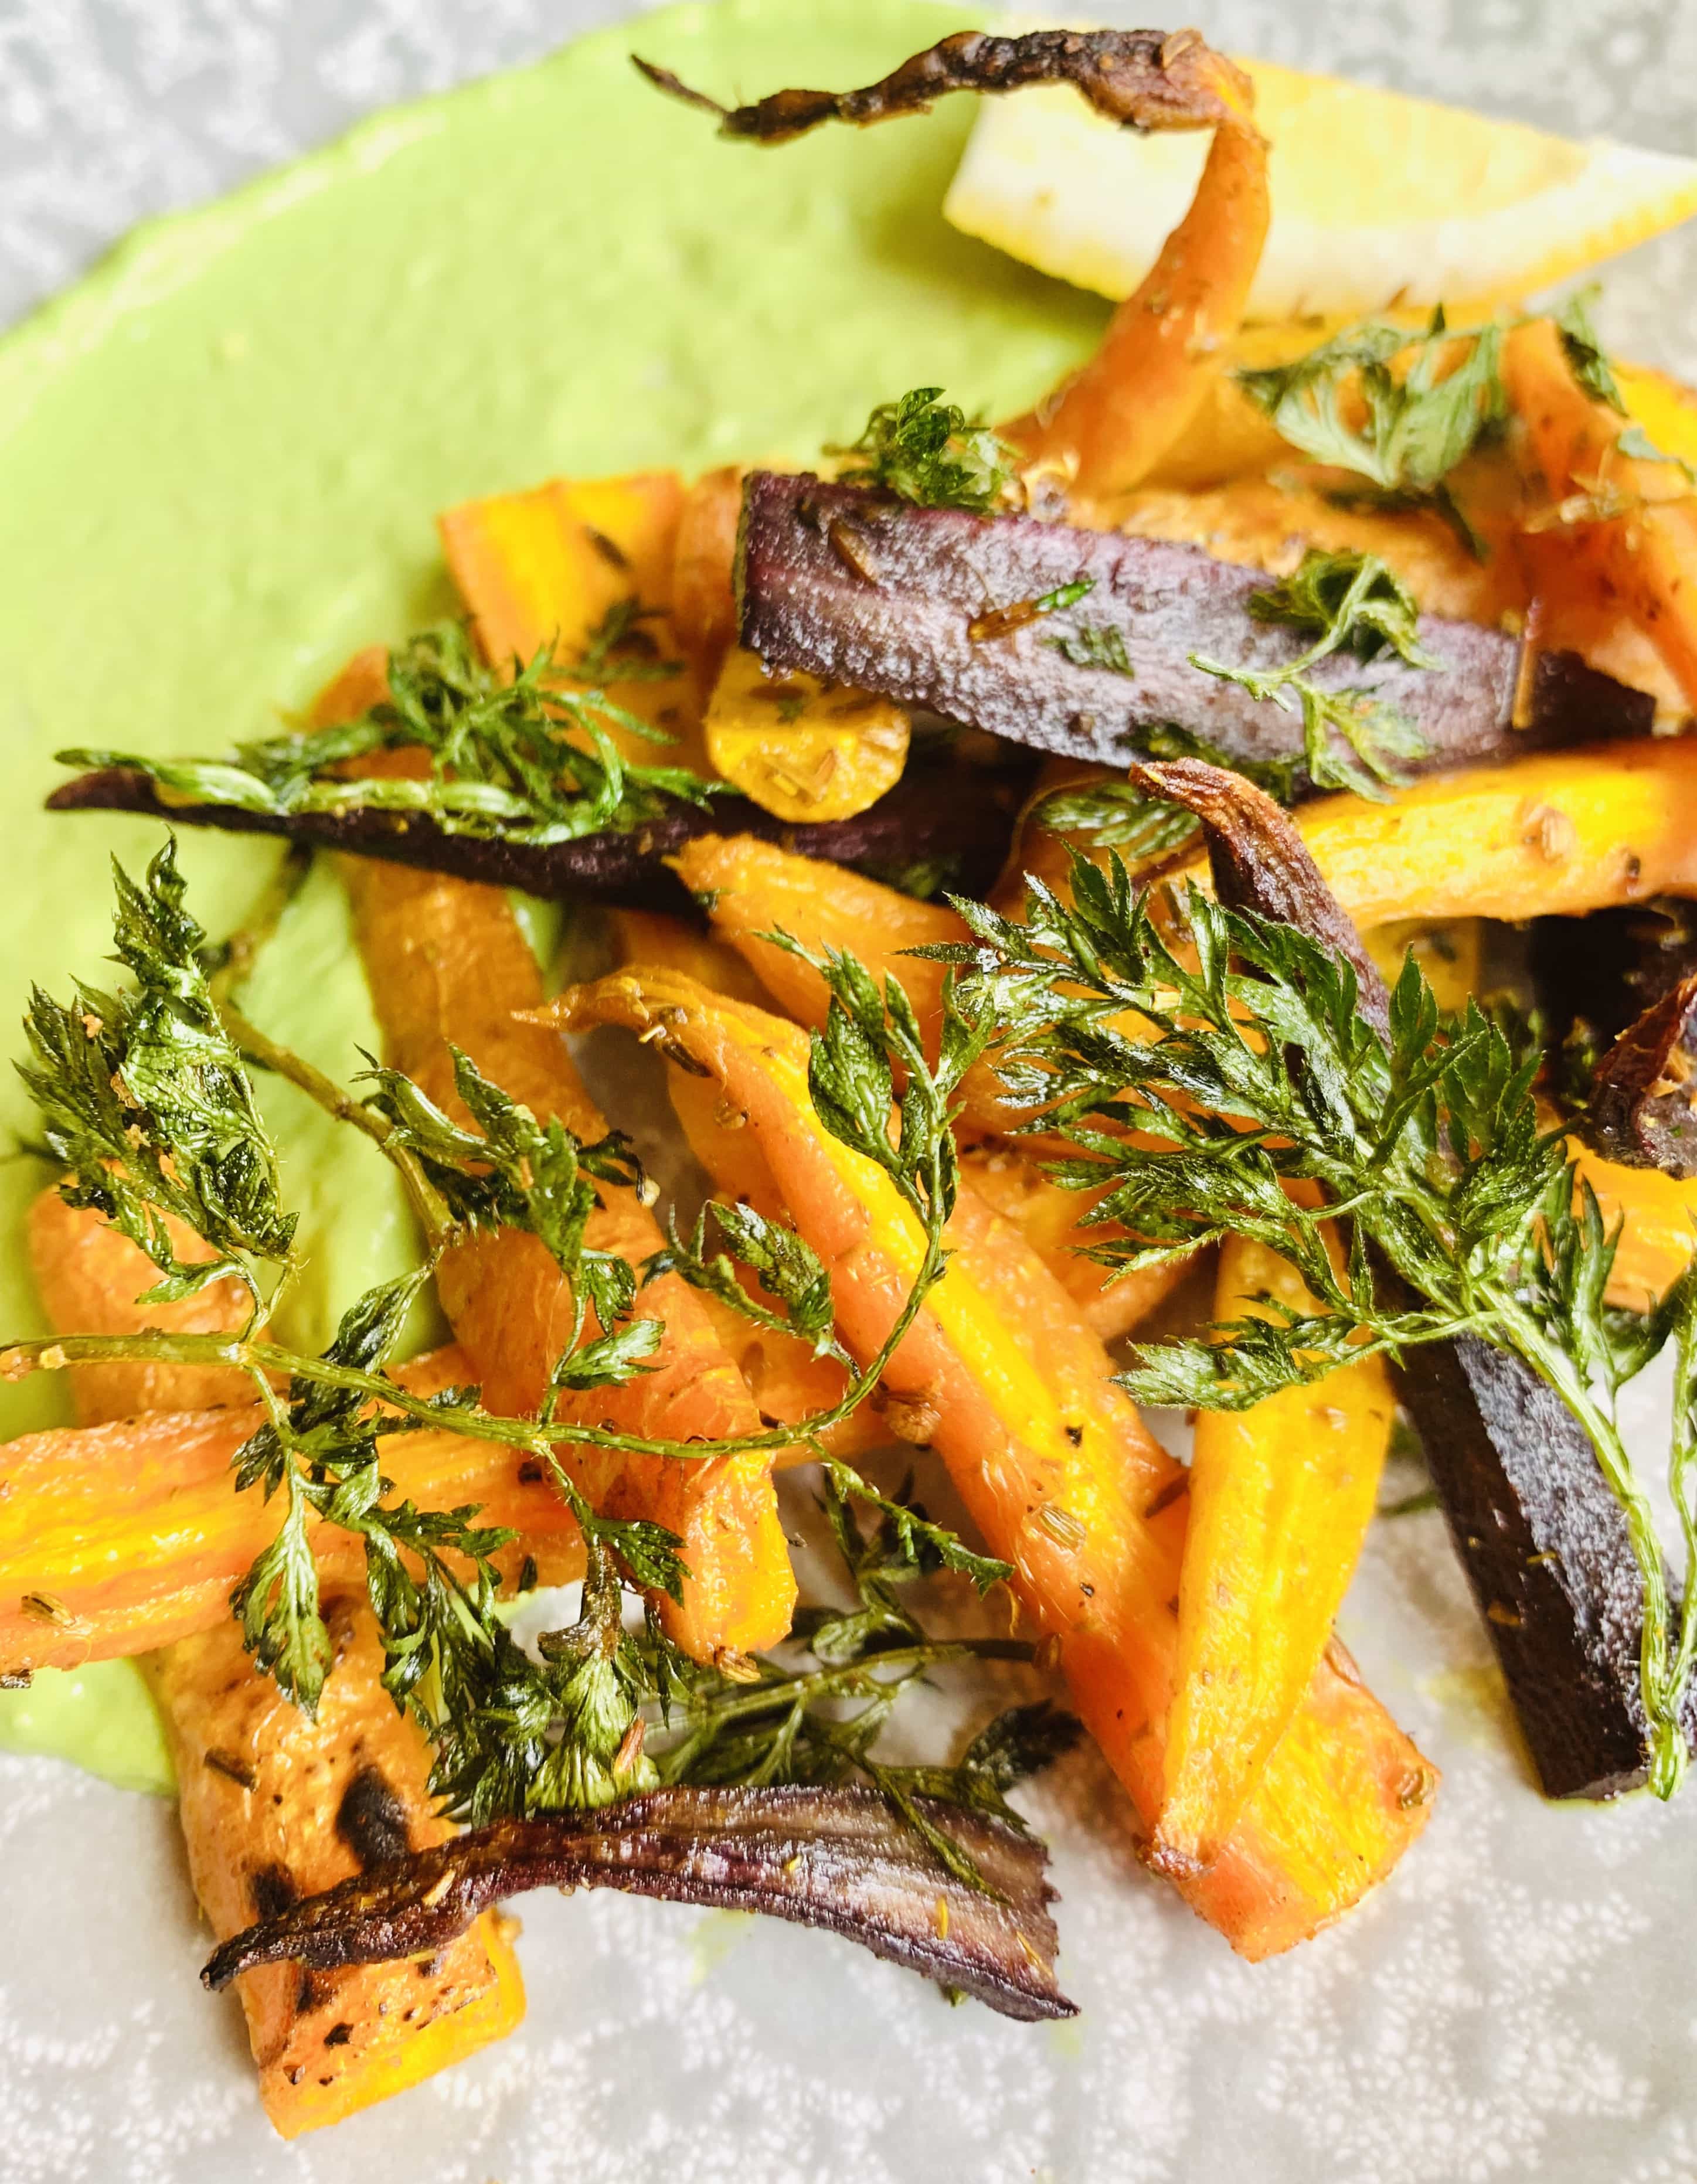 Carrot chips with avocado and garlic chives dip